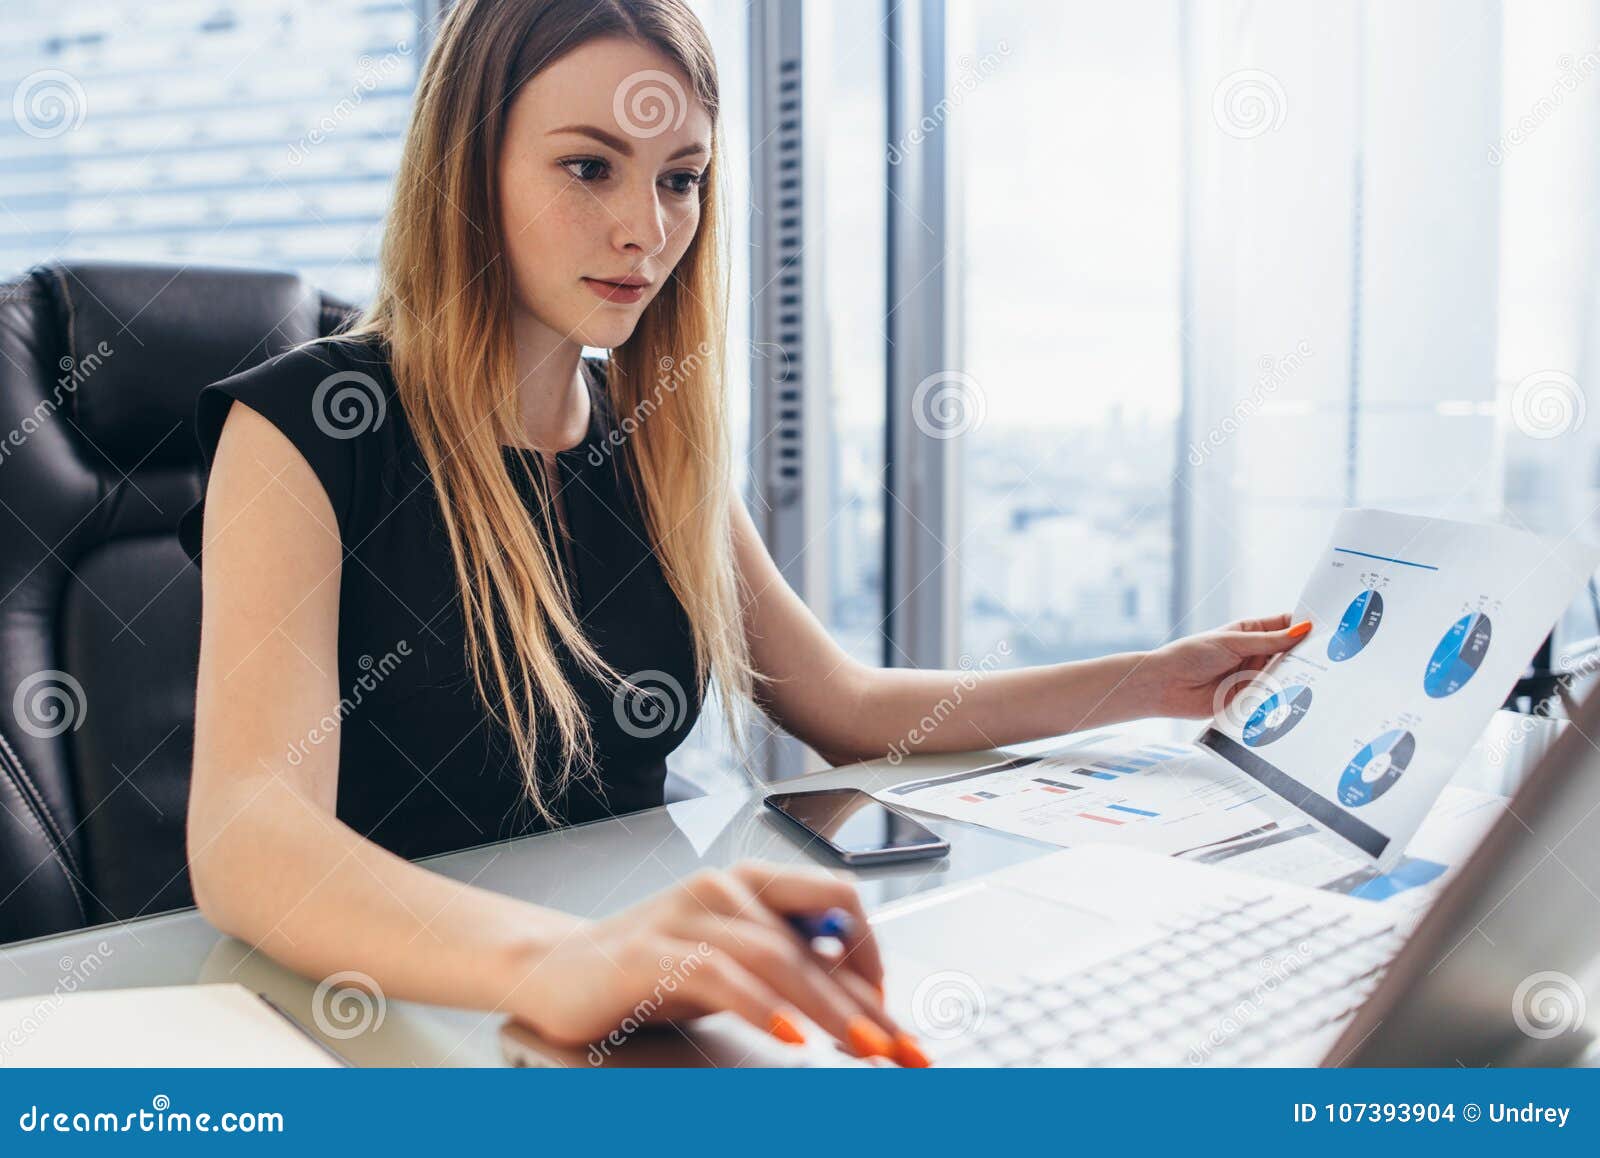 female director working in office sitting at desk analyzing business statistics holding diagrams and charts using laptop